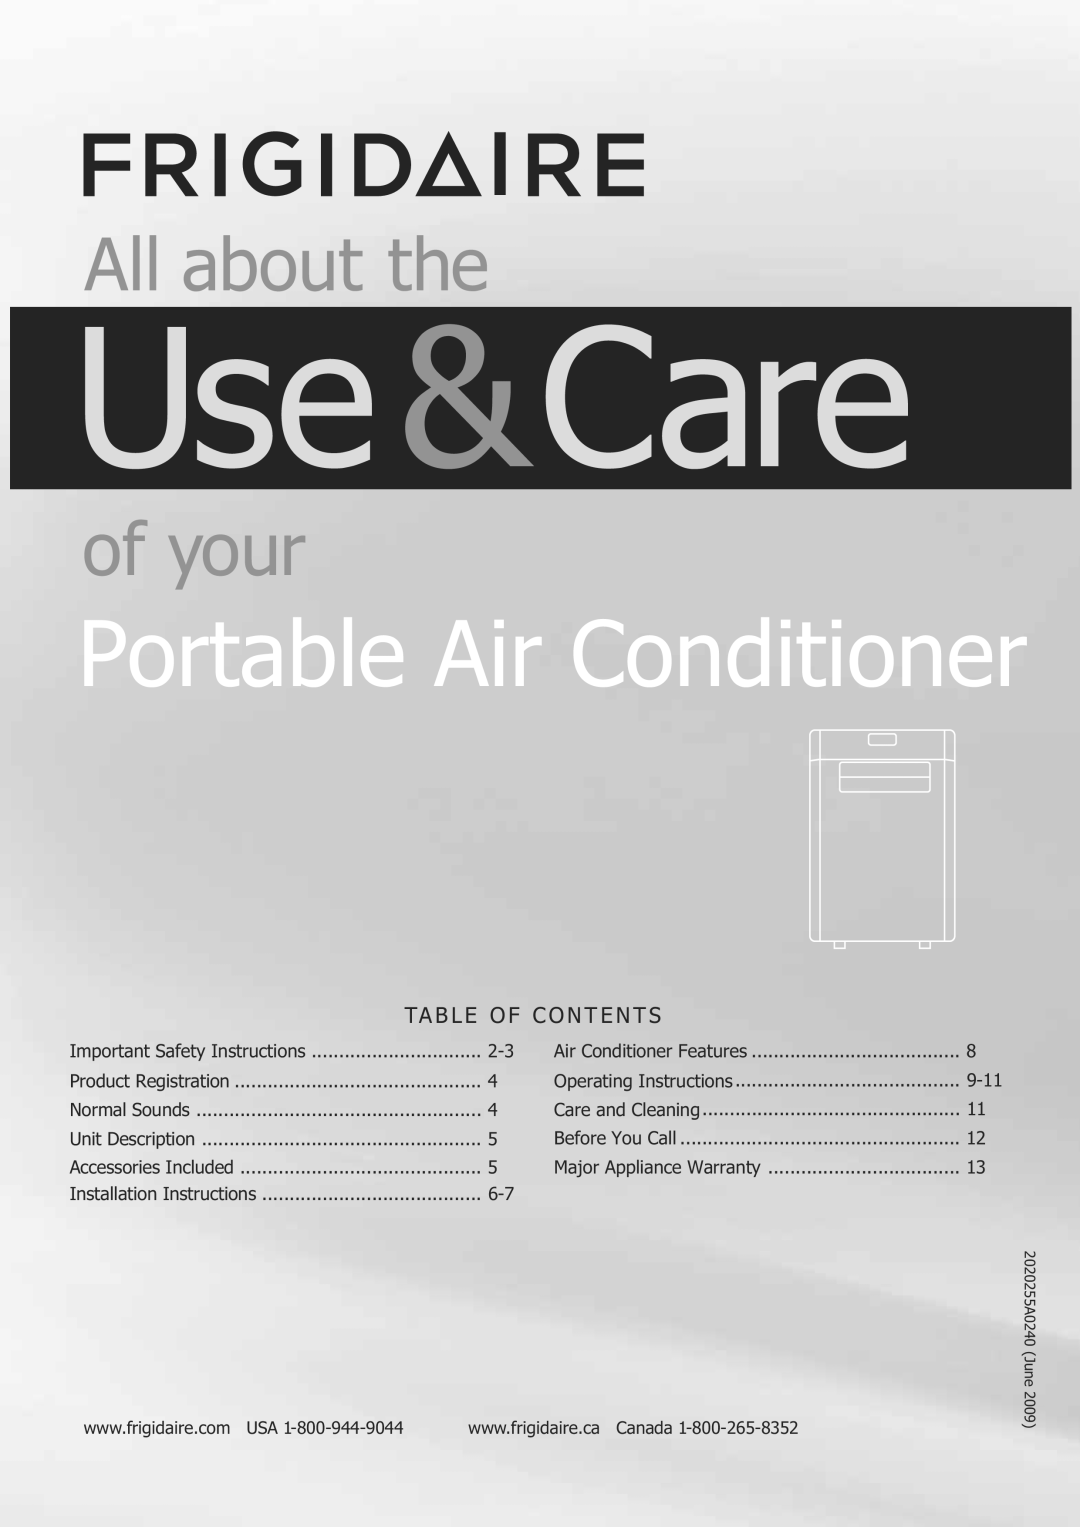 Frigidaire FGHD2472PF installation instructions Use&Care, Portable Air Conditioner, All about the, of your 